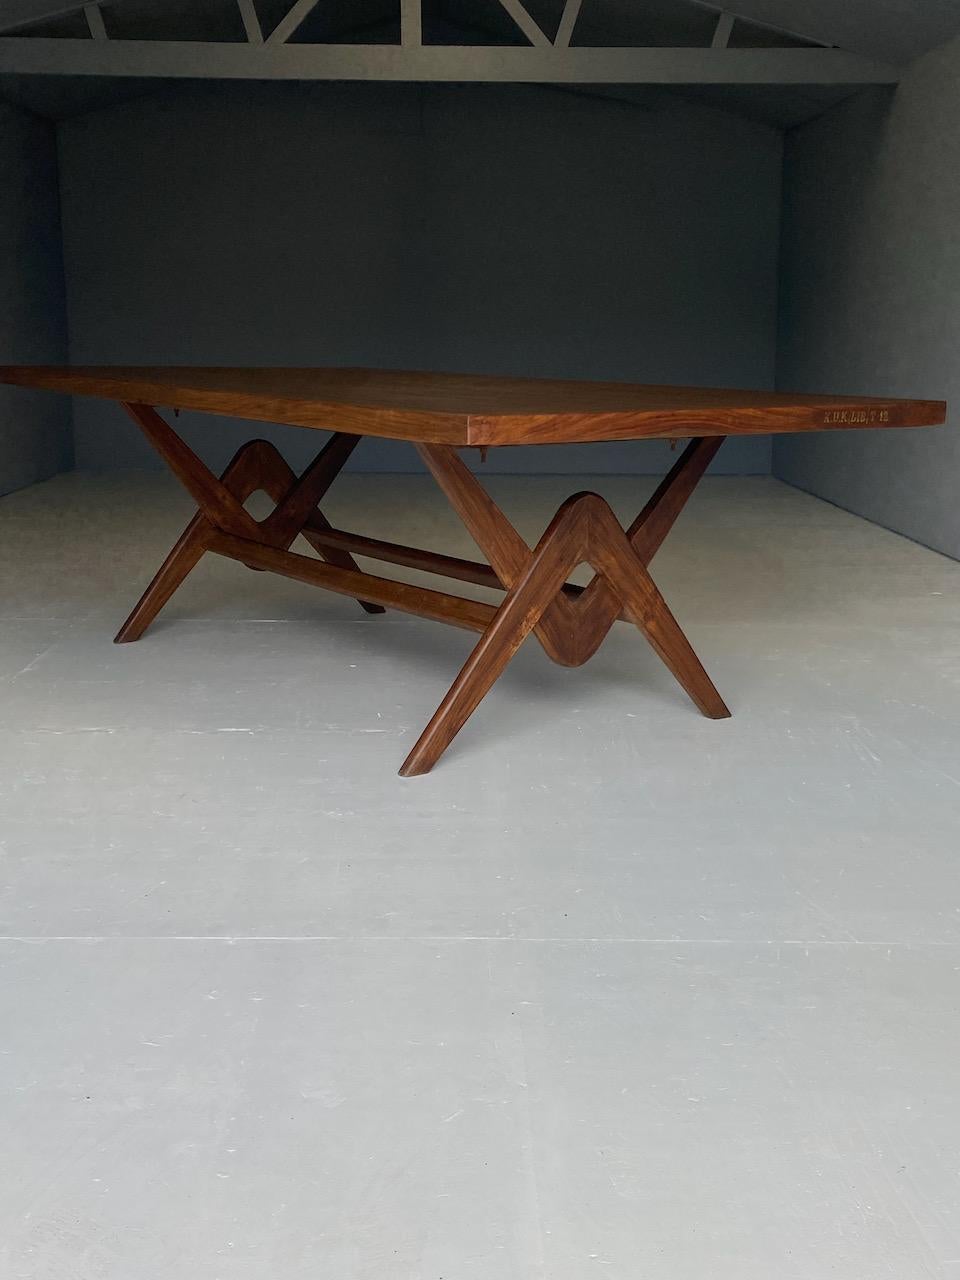 Pierre Jeanneret committee table in teak Chandigarh India Circa 
1963-64. 

Magnificent mid twentieth century Pierre Jeanneret Model: PJ020112 Teak Rectangular Conference Table (Table En Teck) known as 